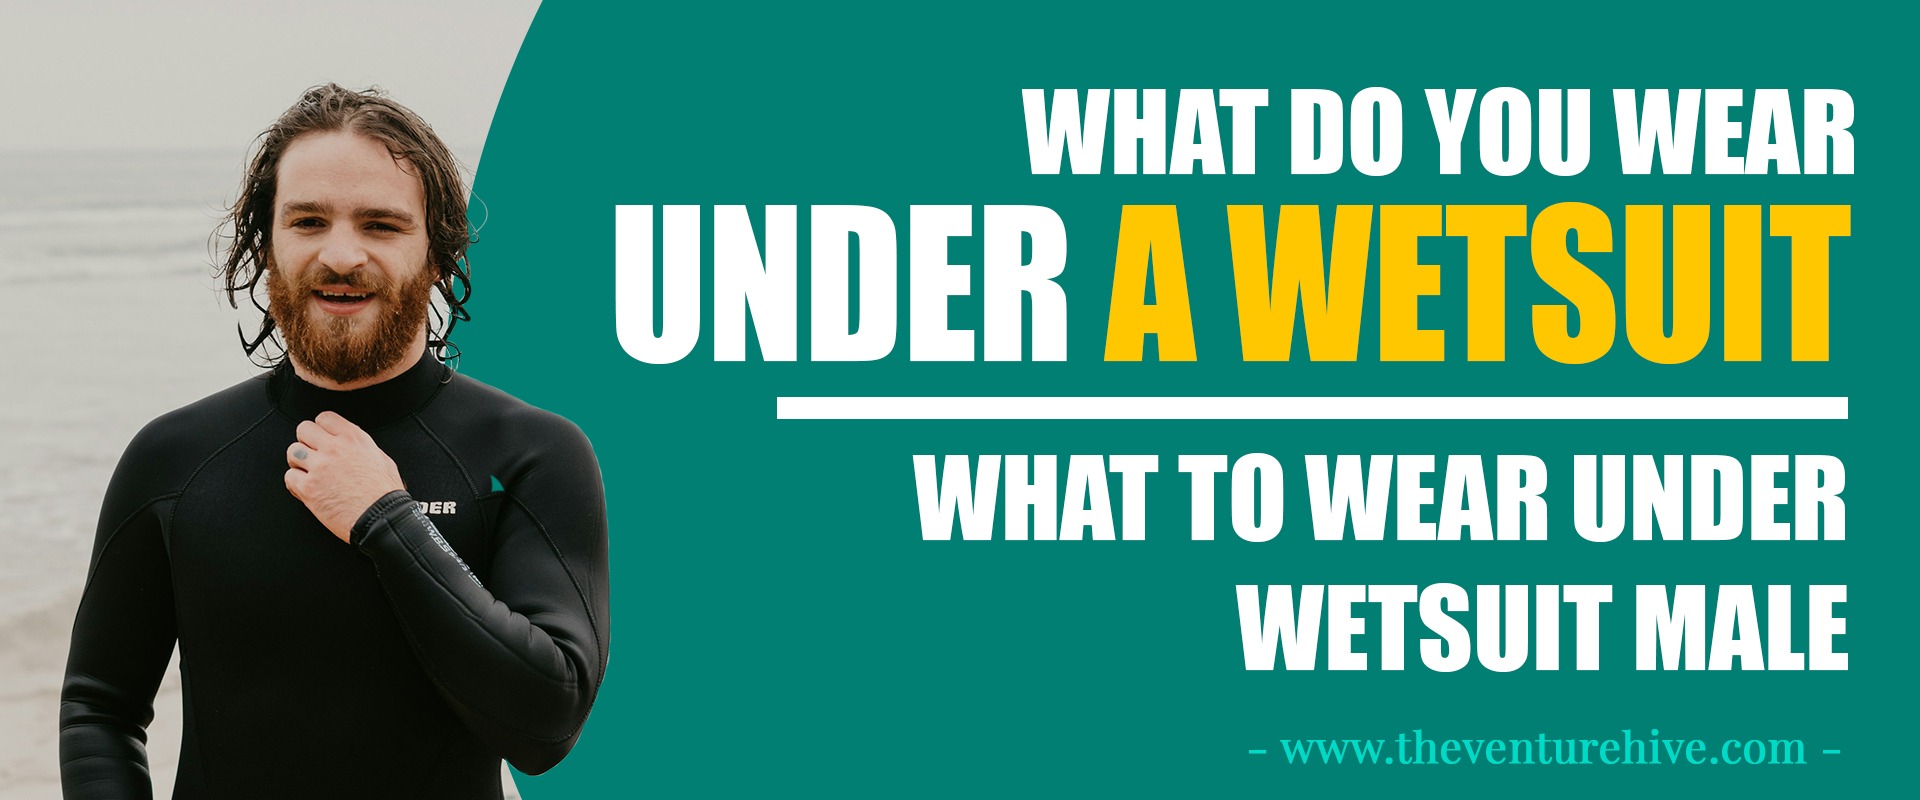 What to wear under wetsuit male